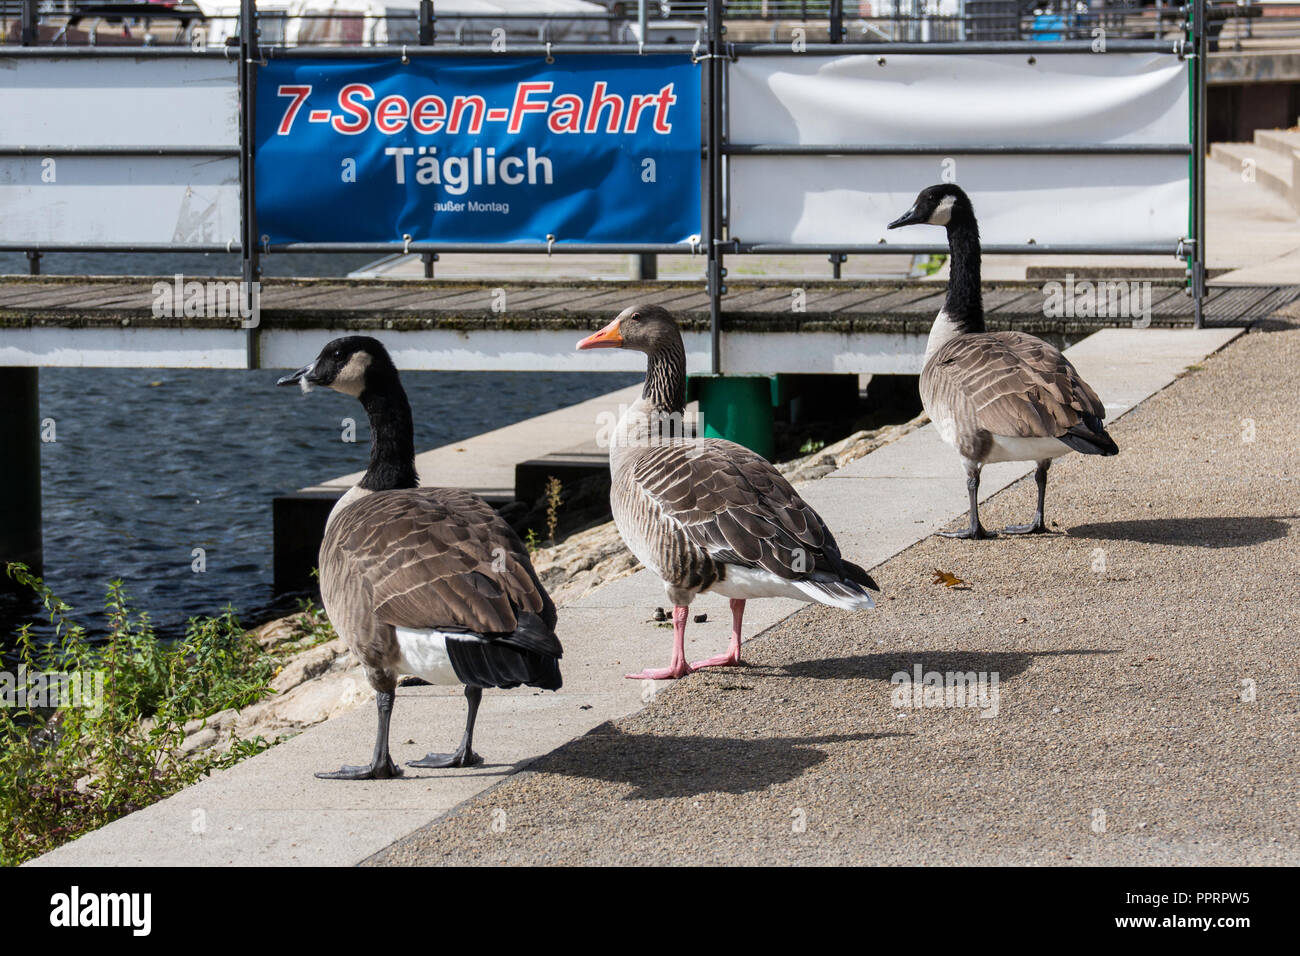 Three geese and a boat rip sign at Kladow, Berlin, Germany Stock Photo